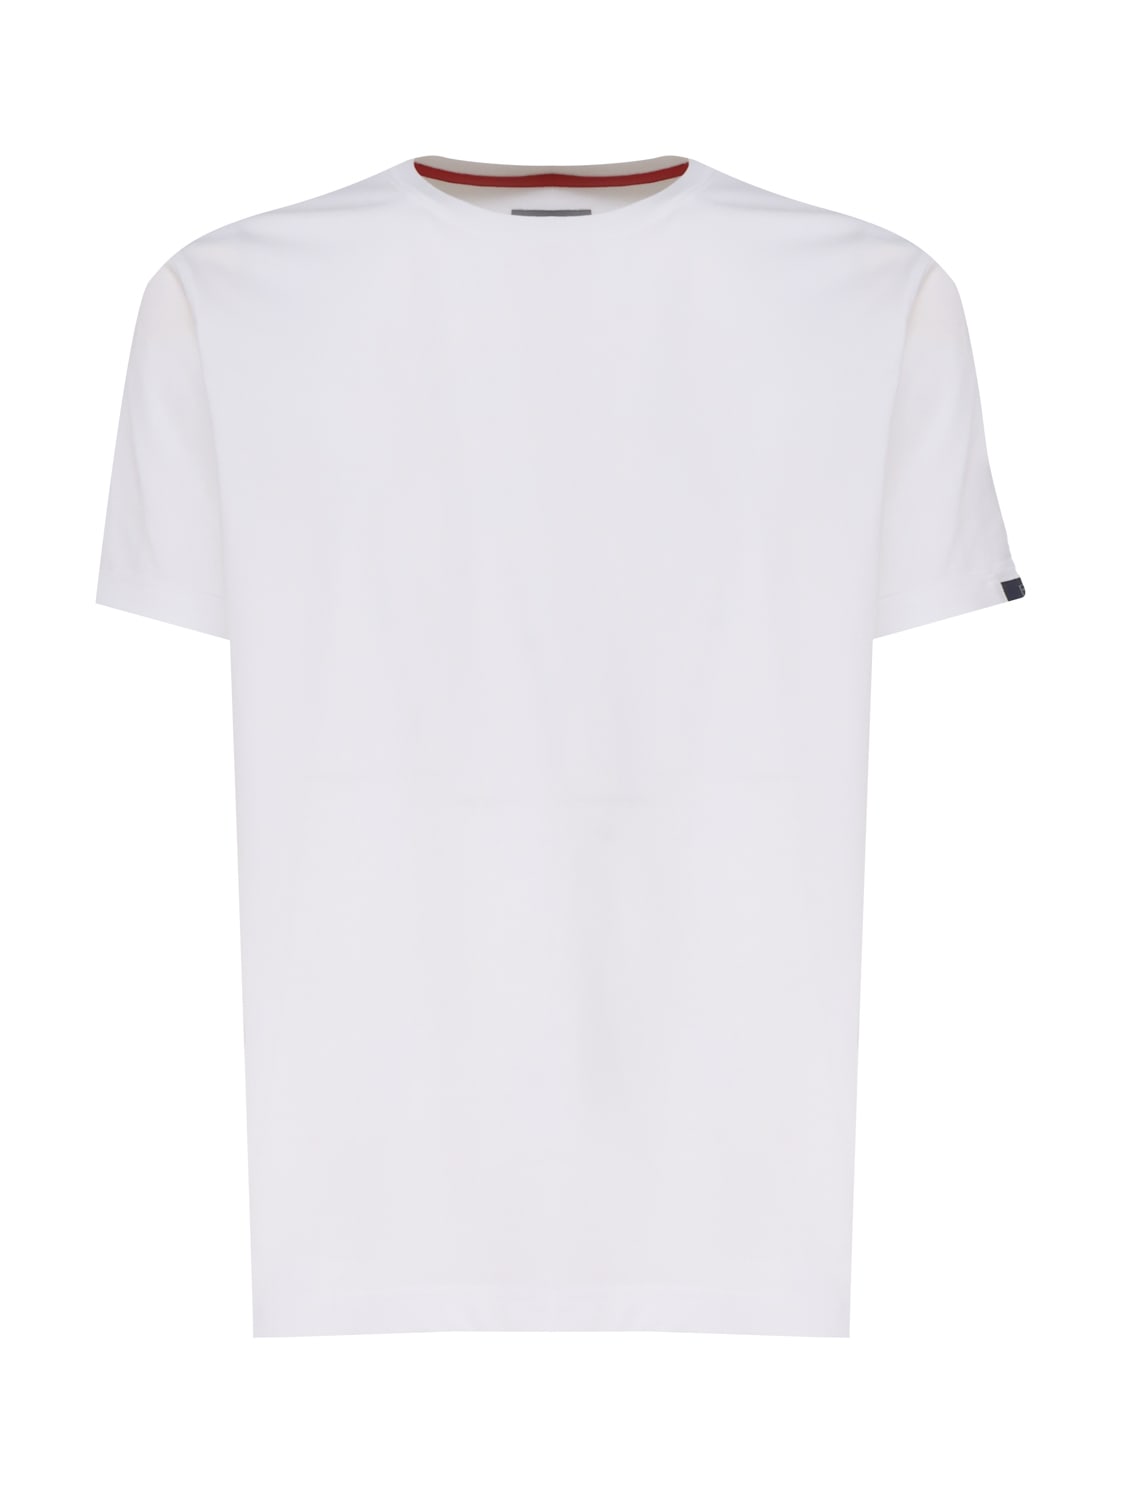 Cotton T-shirt With Contrasting Color Collar